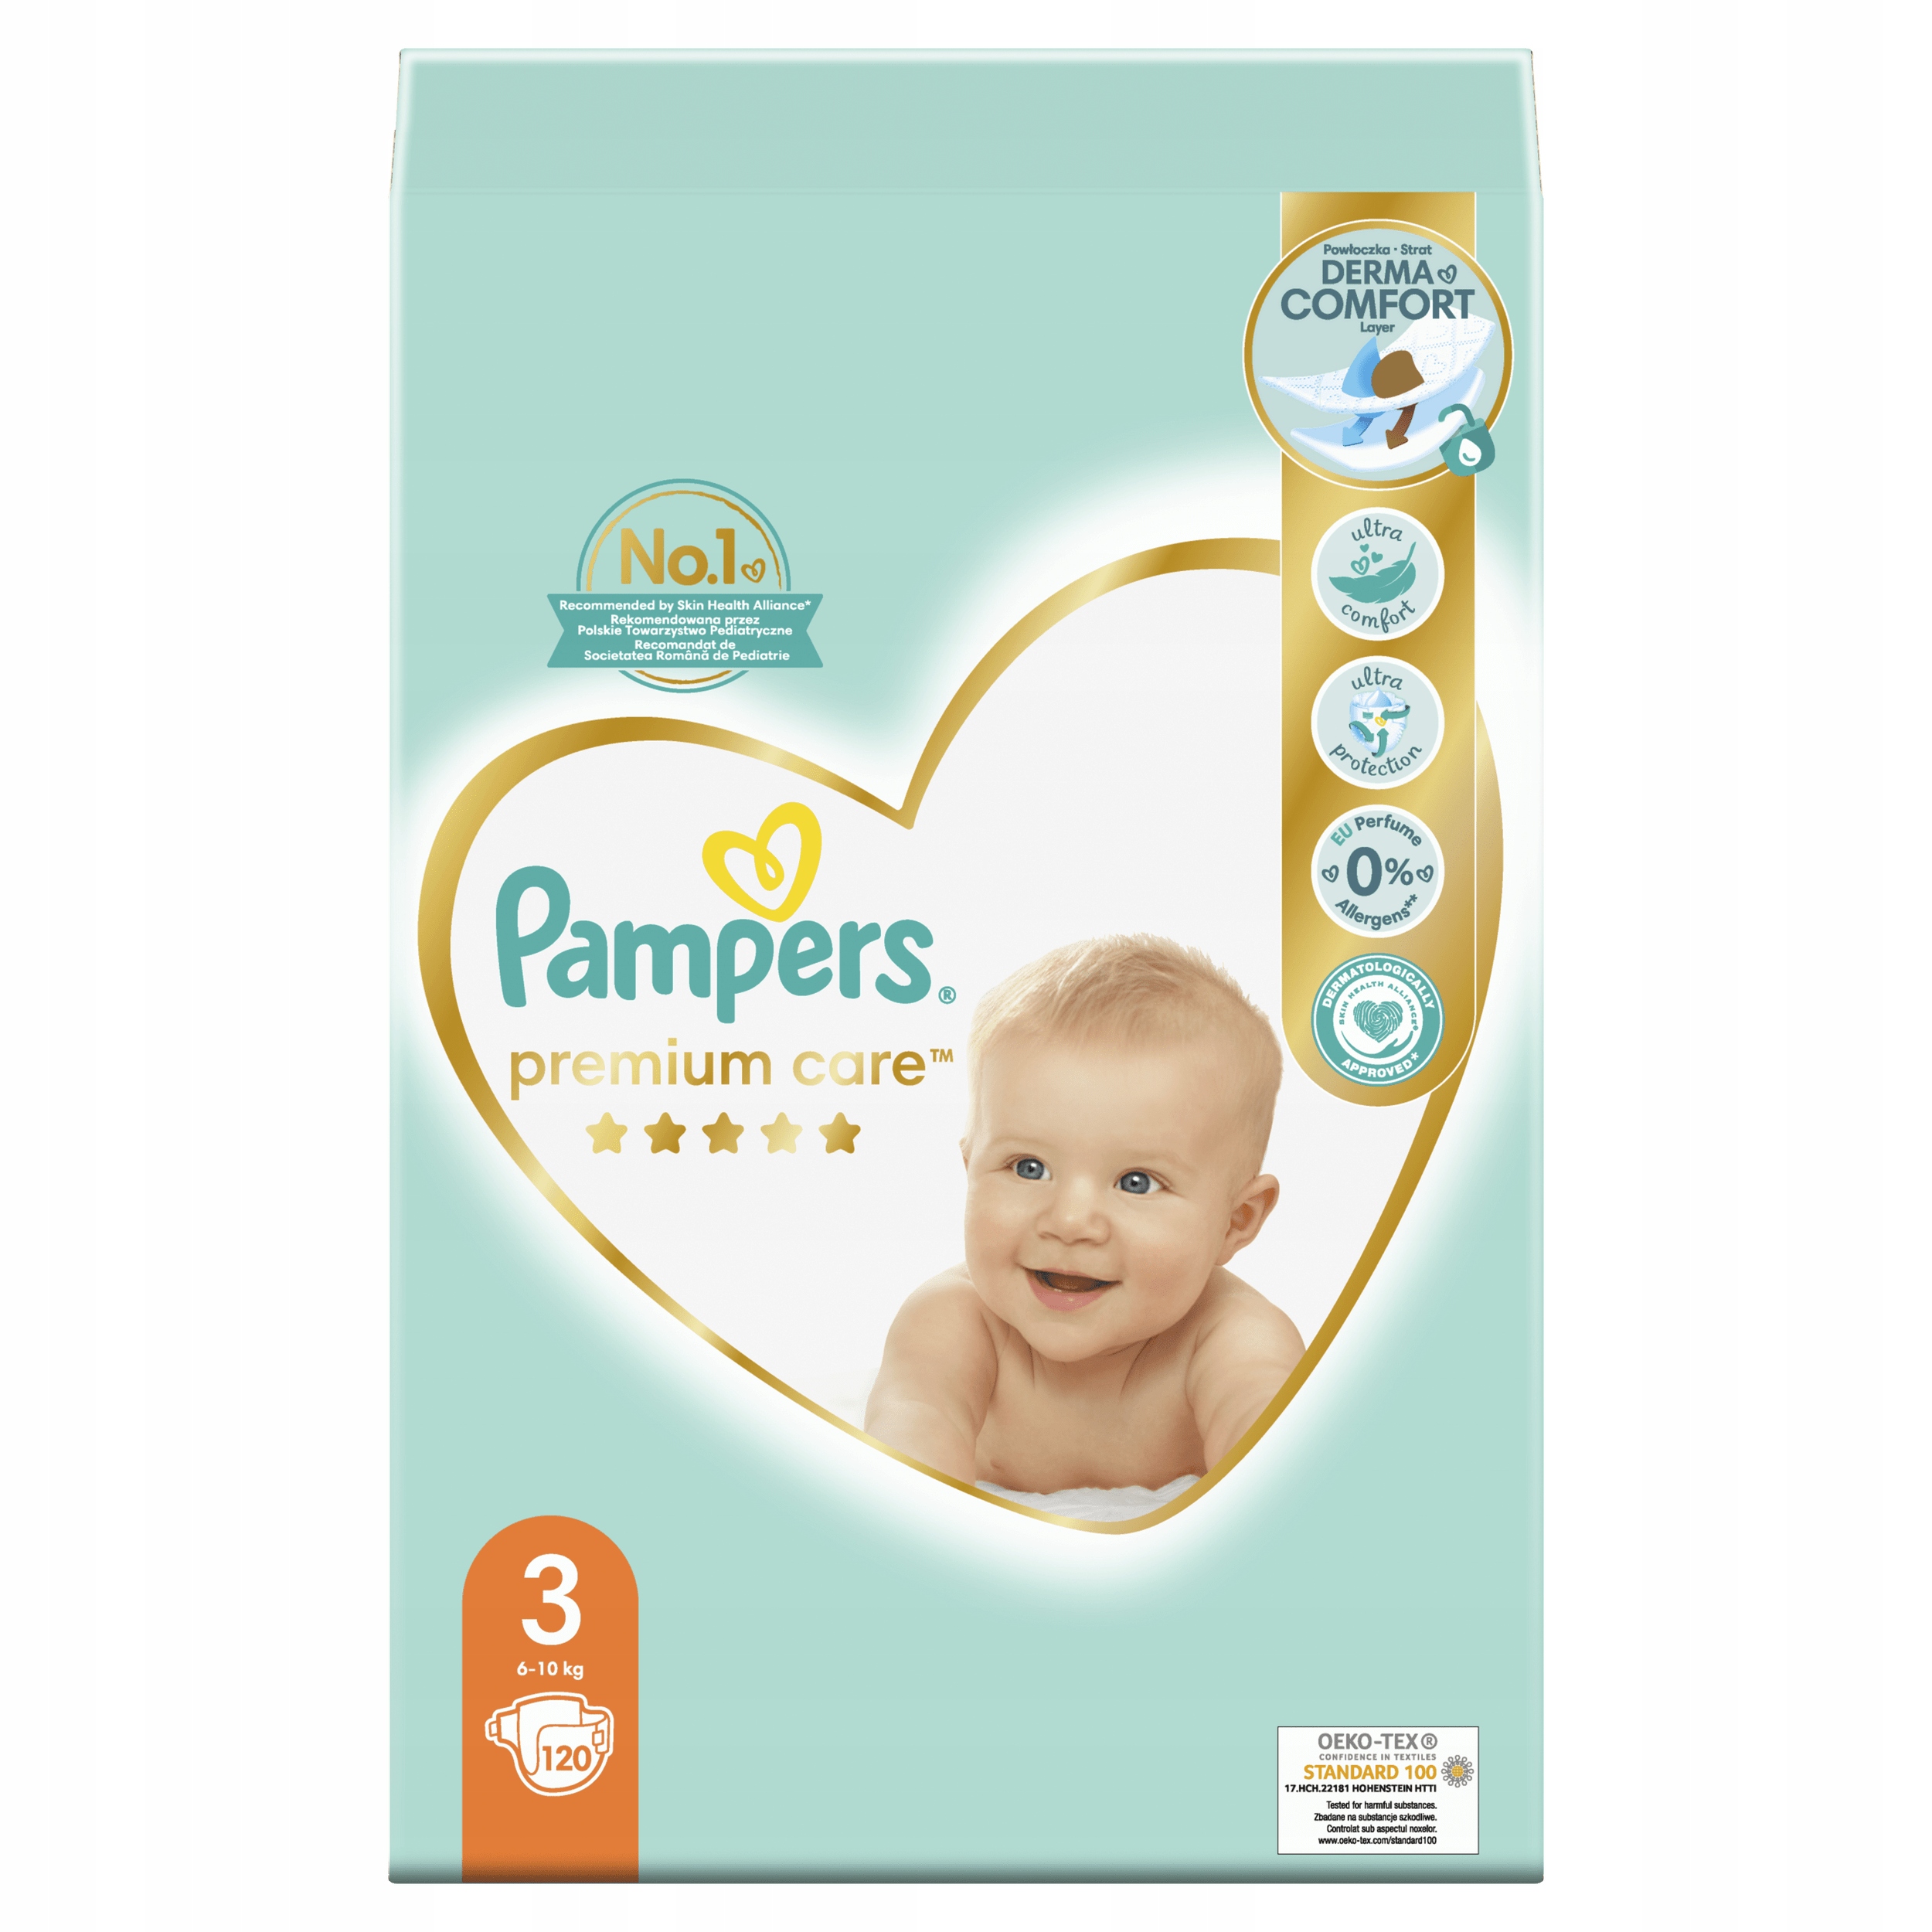 active baby premium care pampers